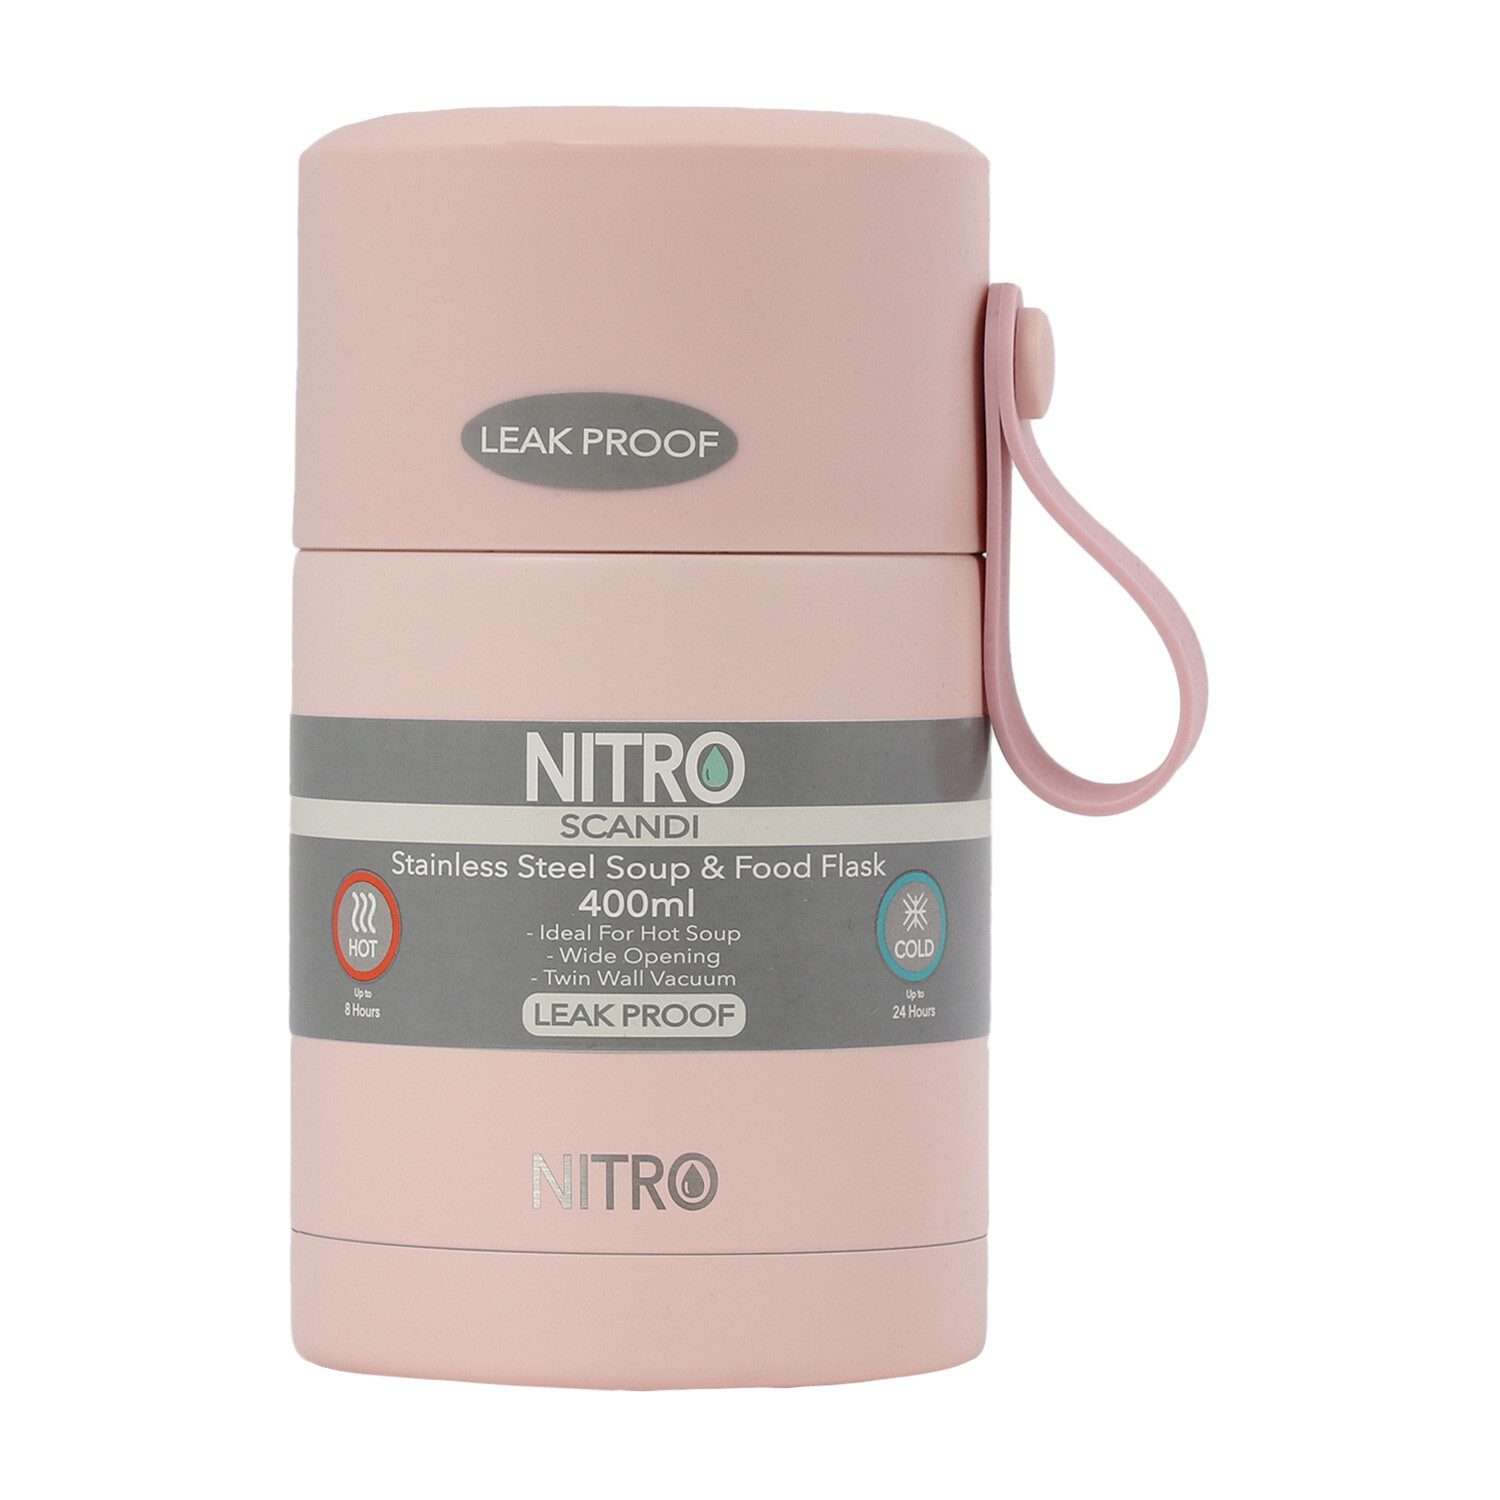 Nitro Scandi 400ml Stainless Steel Soup and Food Flask Image 2